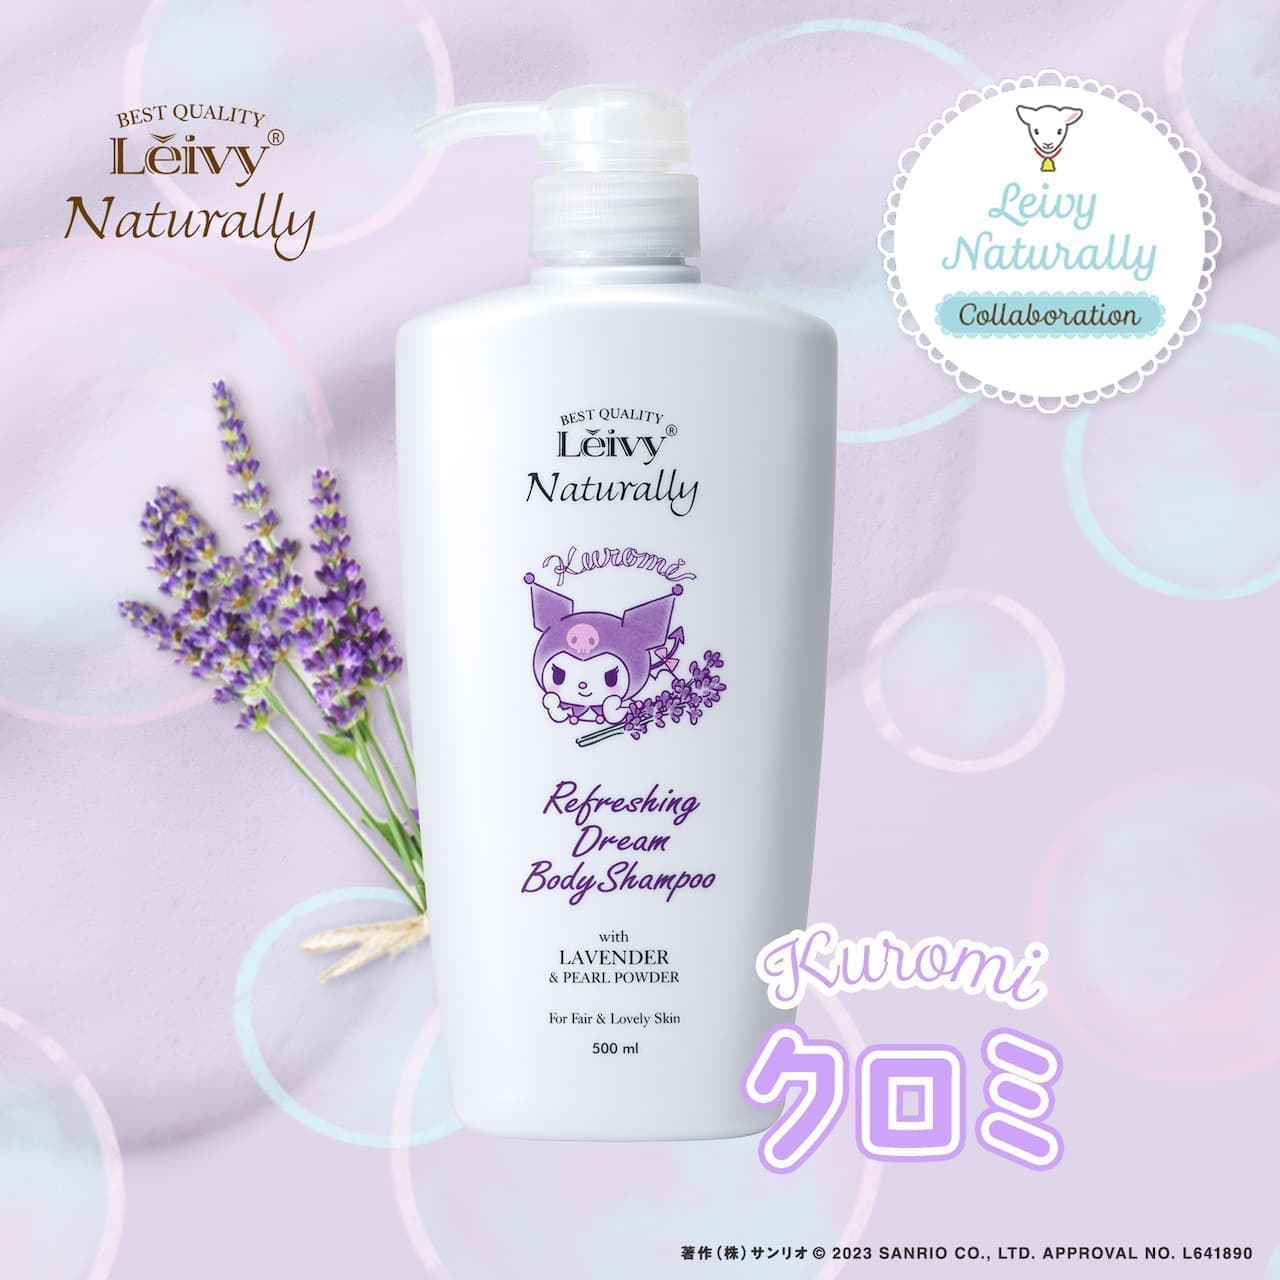 LeivyNaturally "Cinnamoroll" and "Kuromi" collaboration limited edition bottle